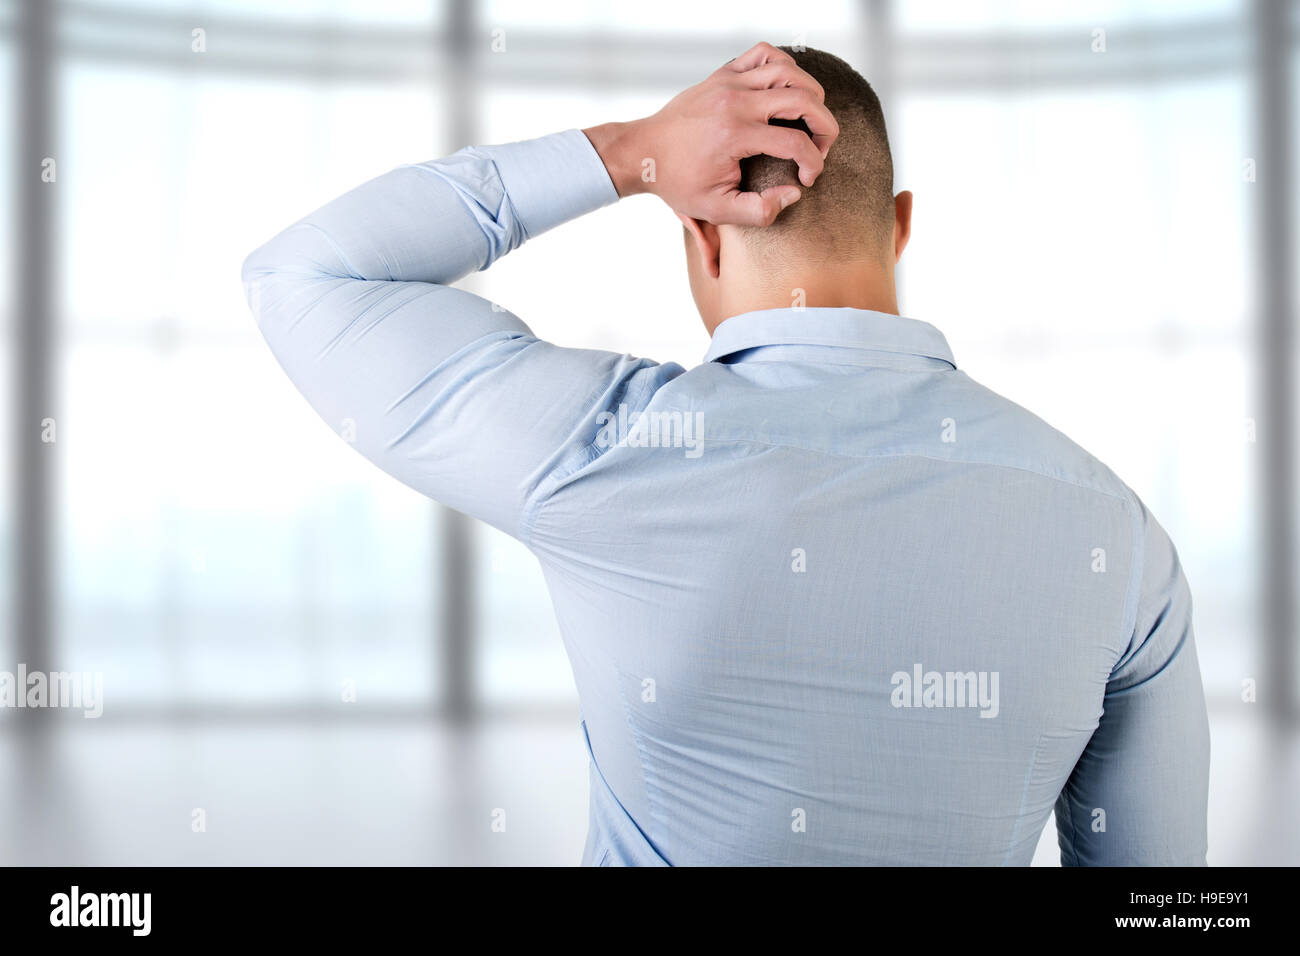 Man holding is head in frustration, isolated in white Stock Photo